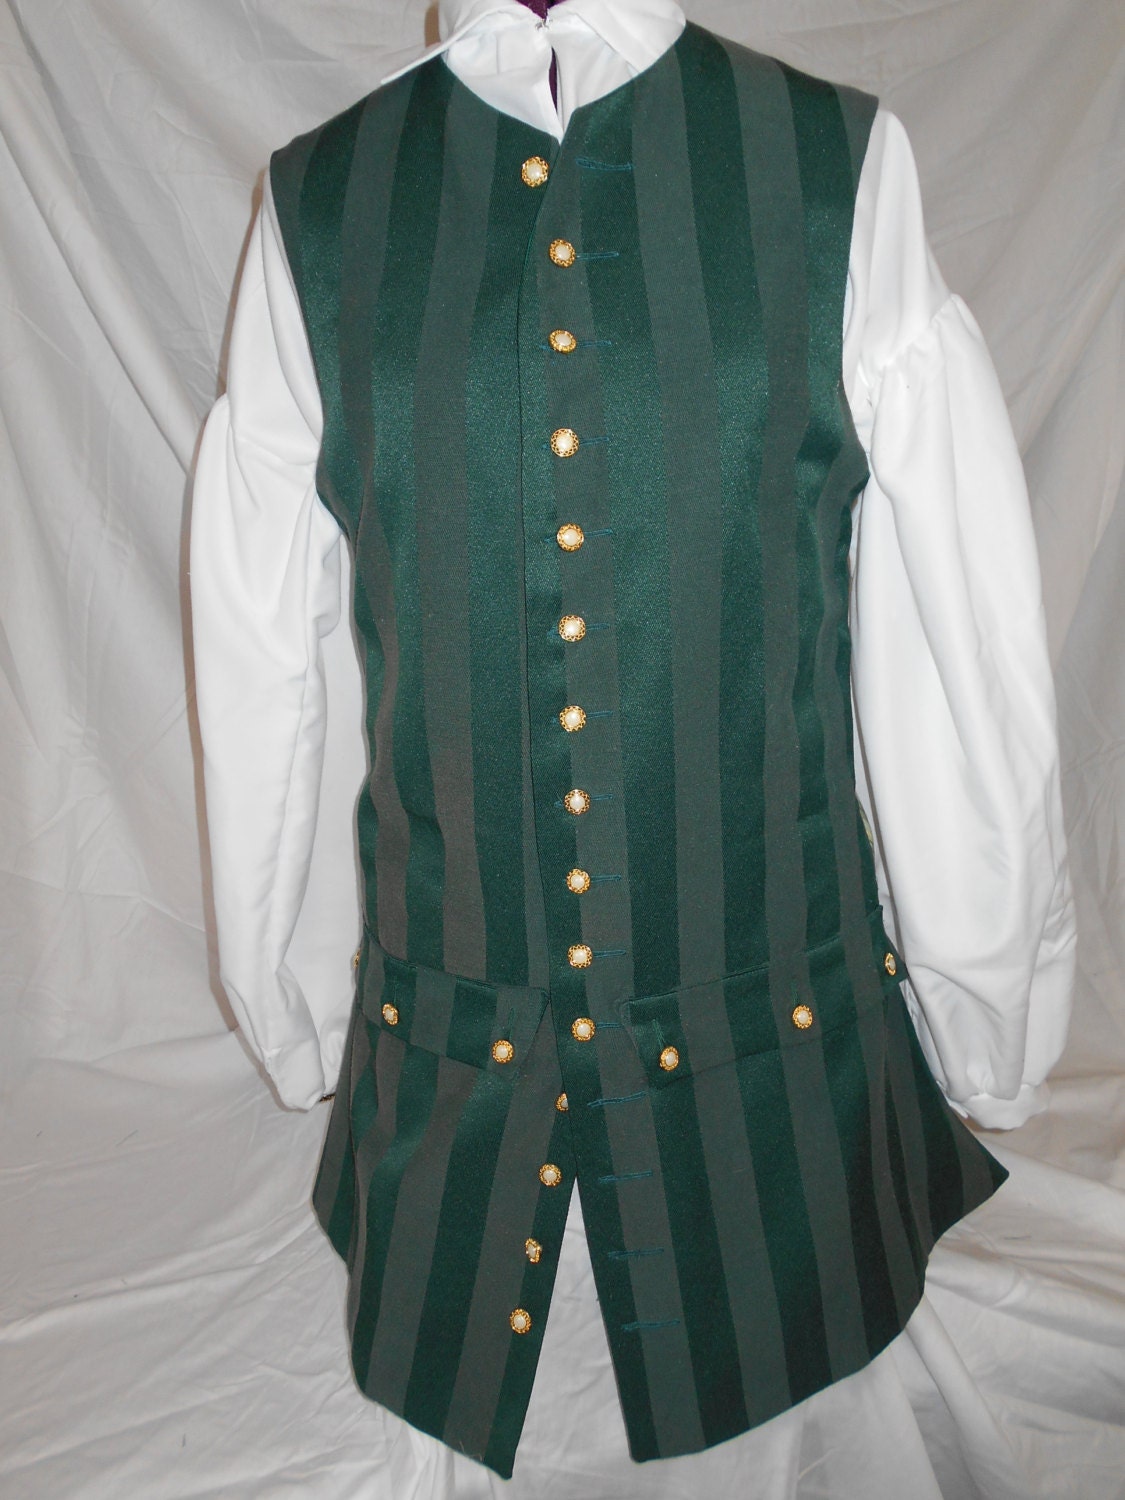 Forest Green Men's Colonial Pirate Waistcoat Vest Small